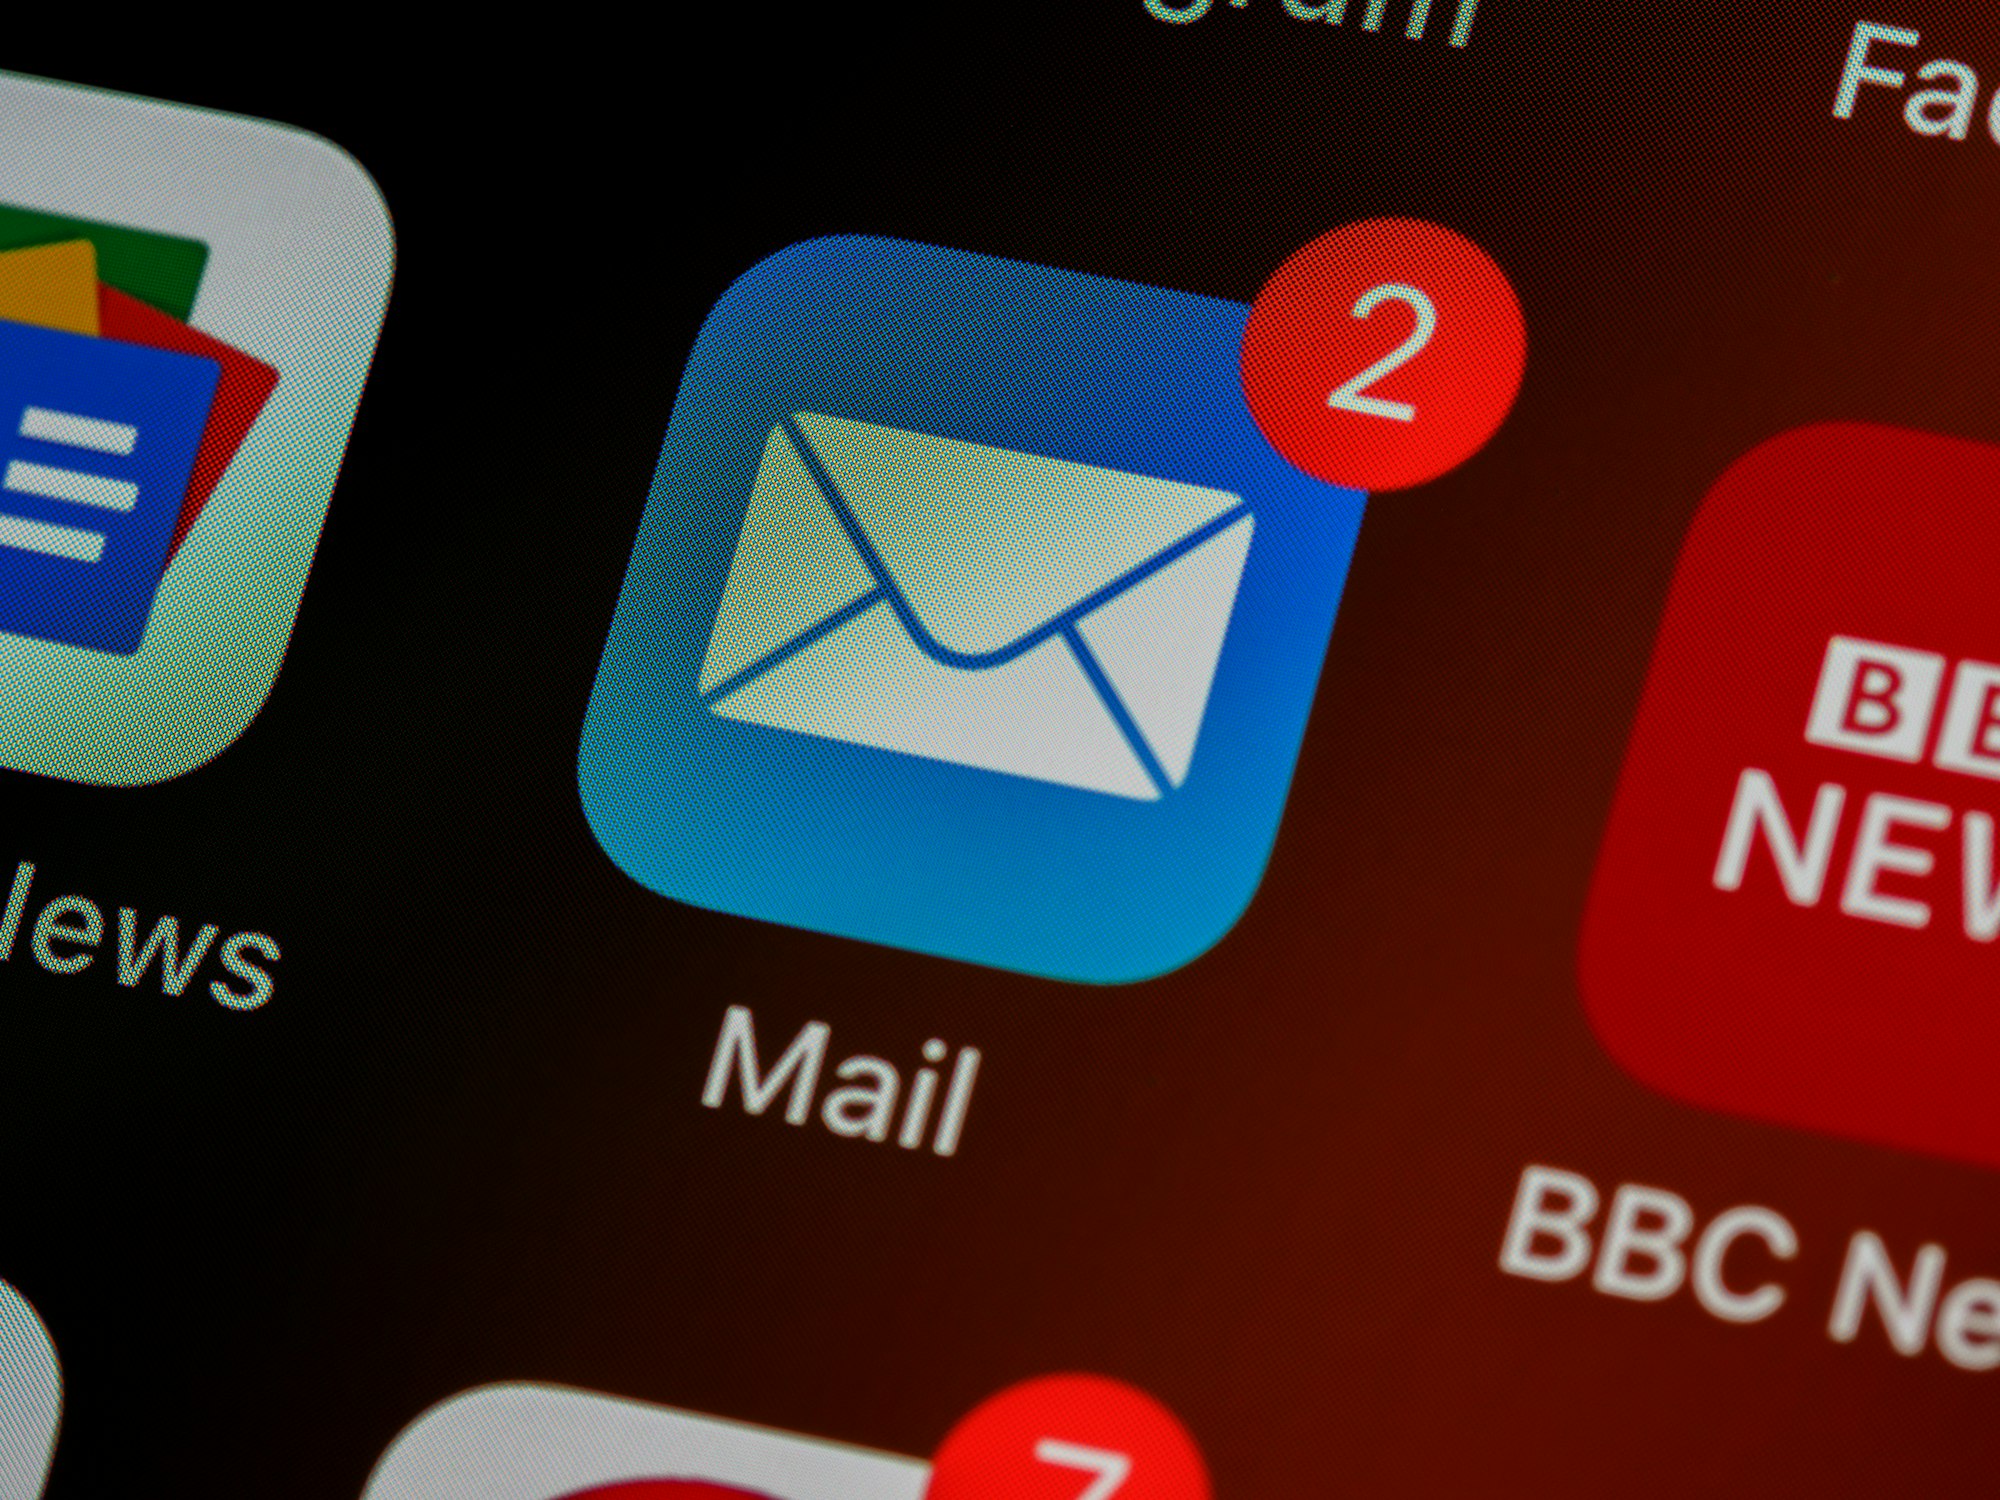 6 Tips for Managing Business Email For A Stress-Free Inbox